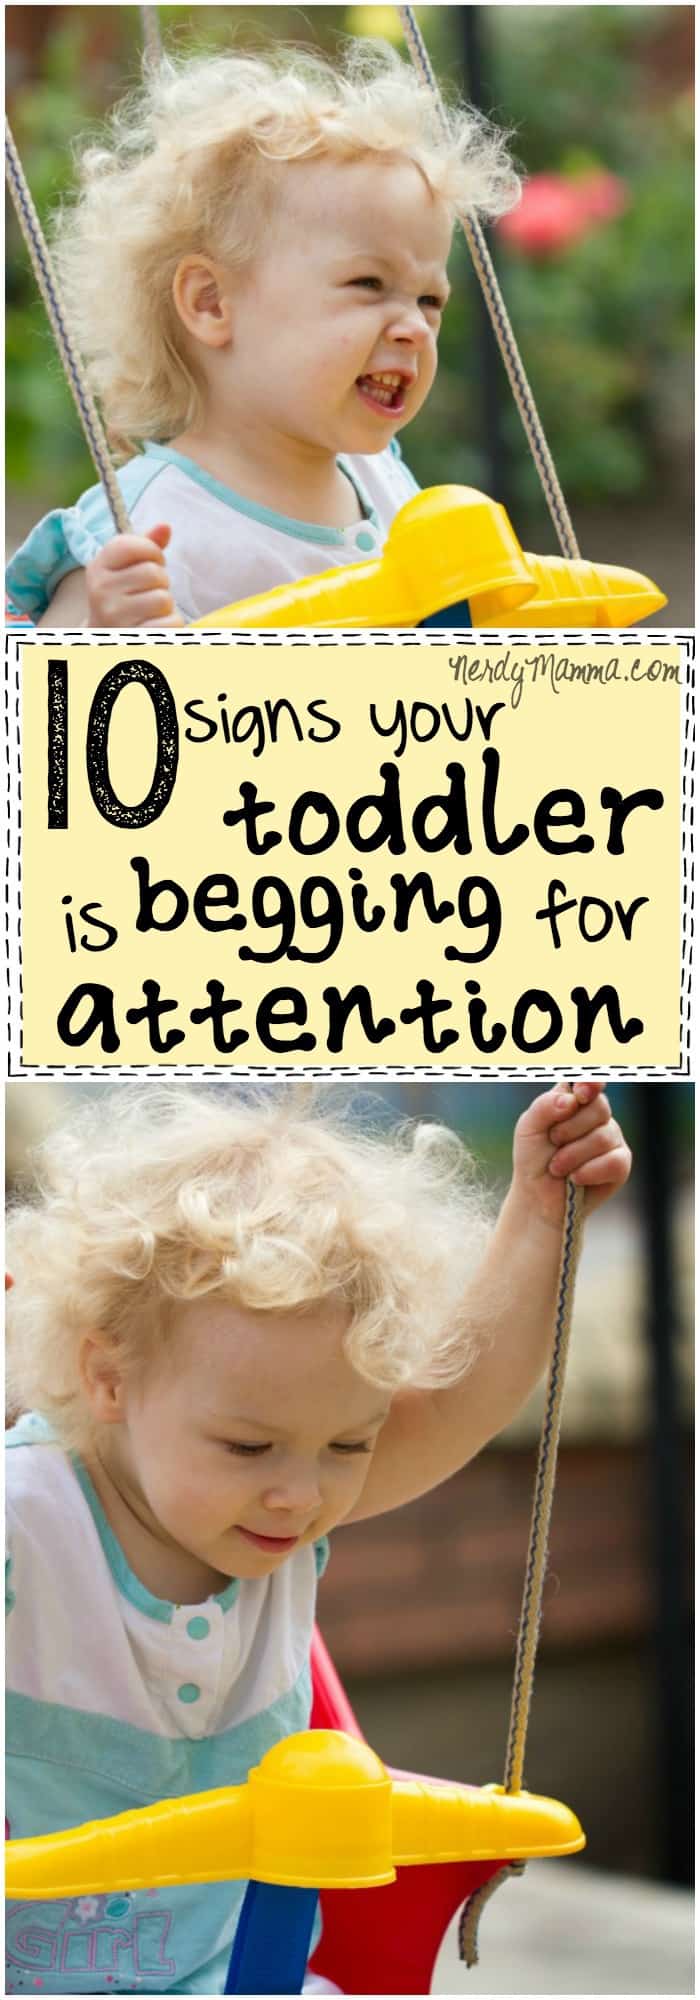 This is funny, but totally hits the nail on the head. I just love these 10 signs your toddler is begging for attention.